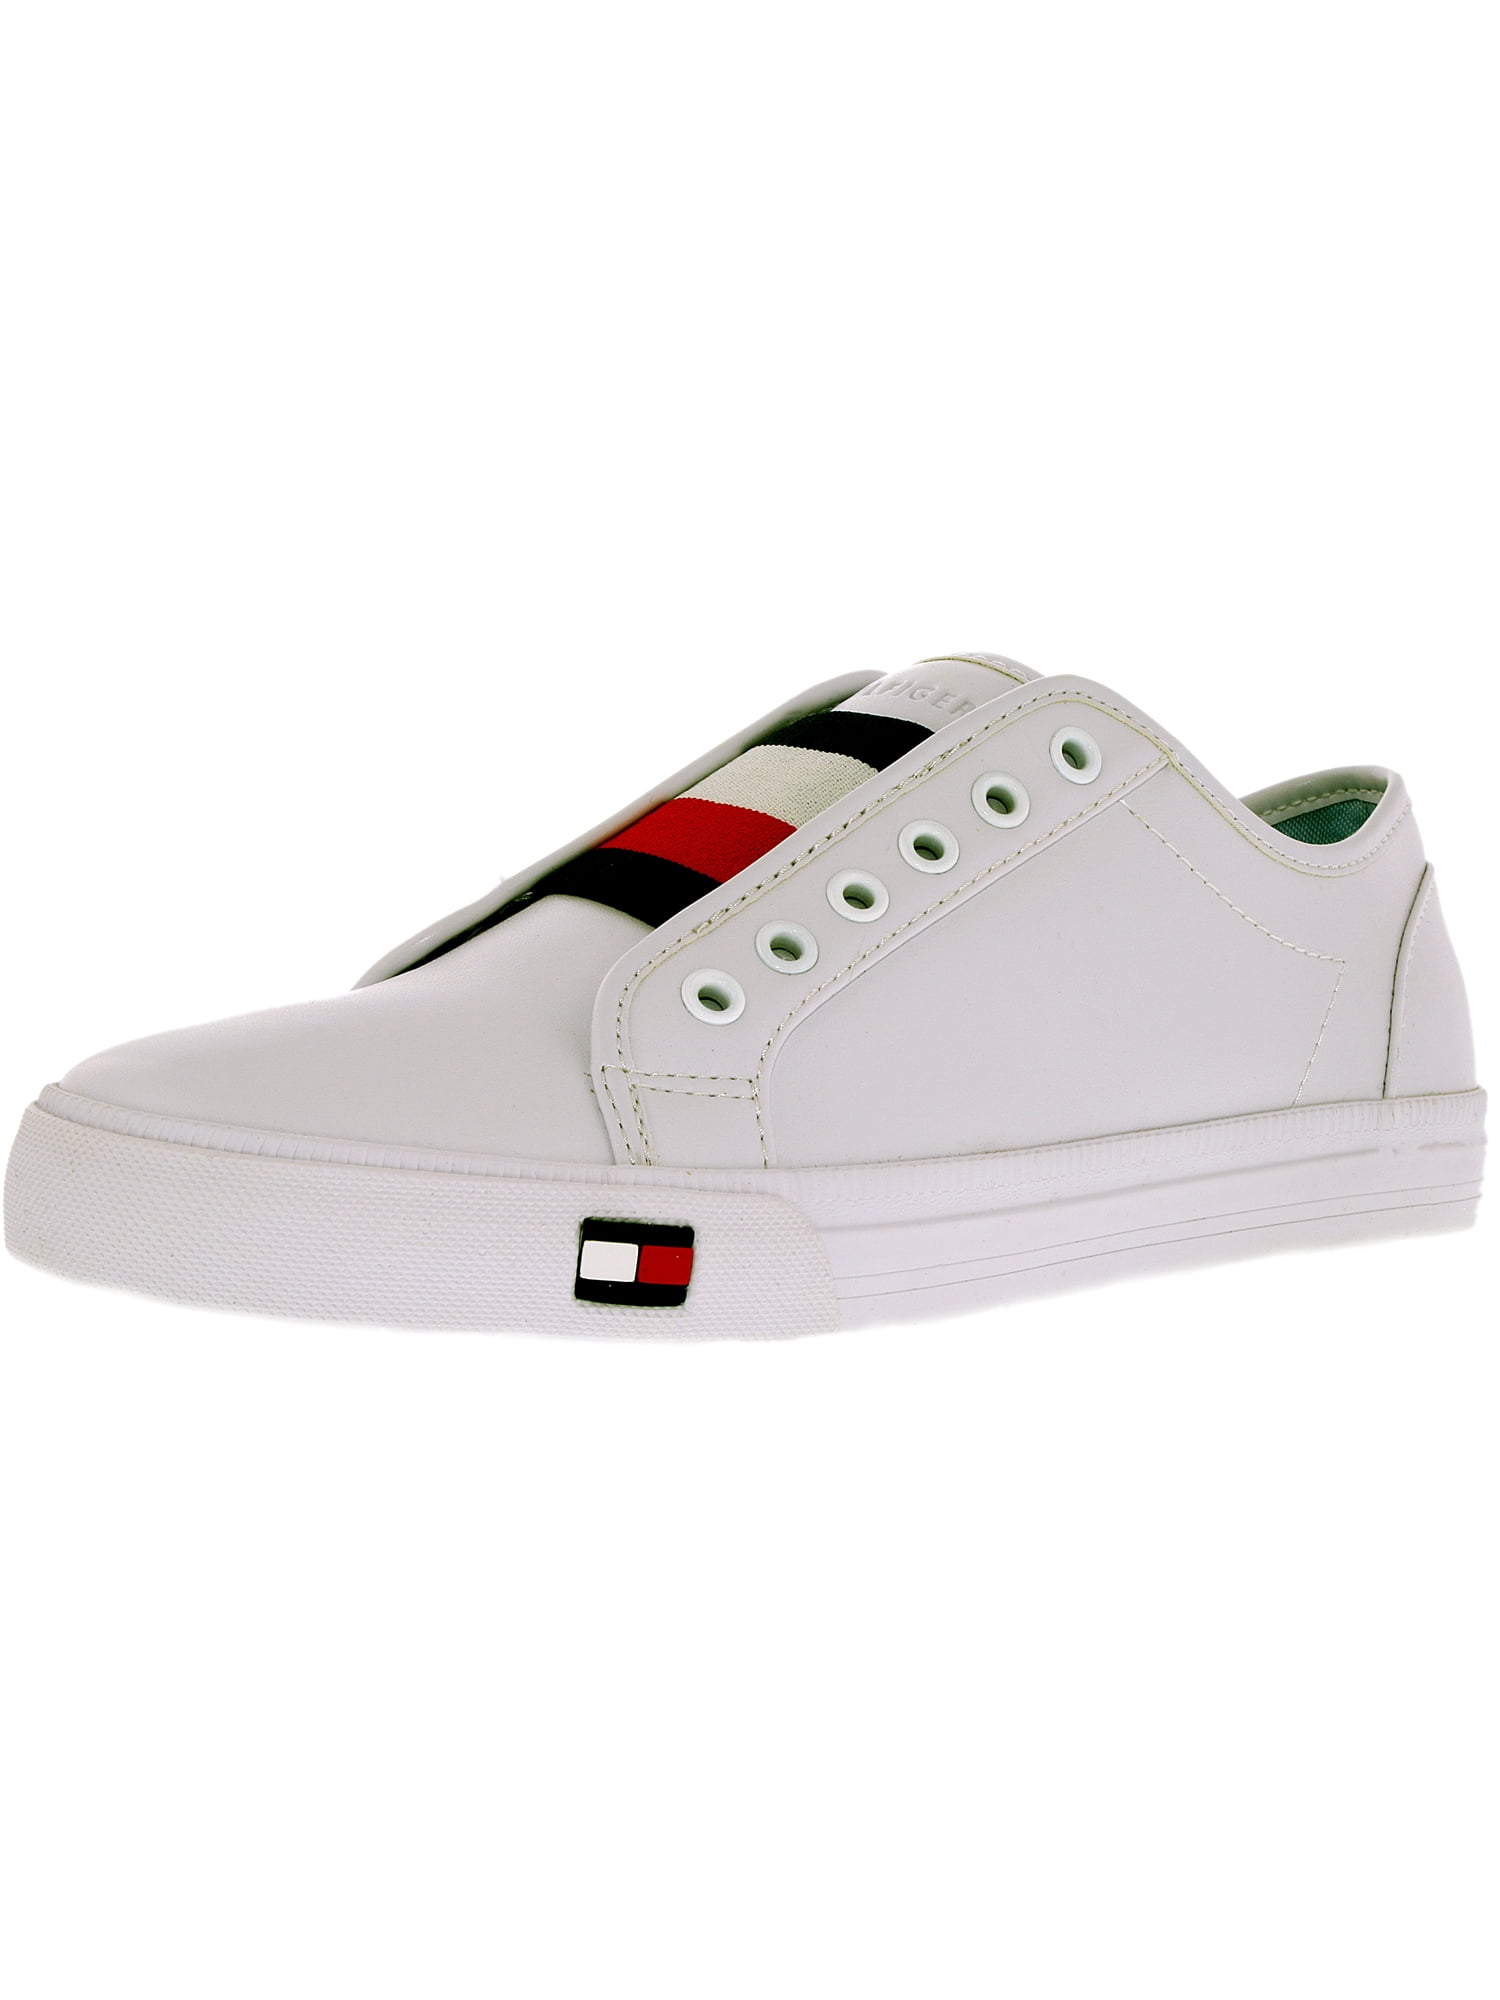 Tommy Hilfiger Women's Anni White Multi Ankle-High Leather Fashion Sneaker  - 5.5M